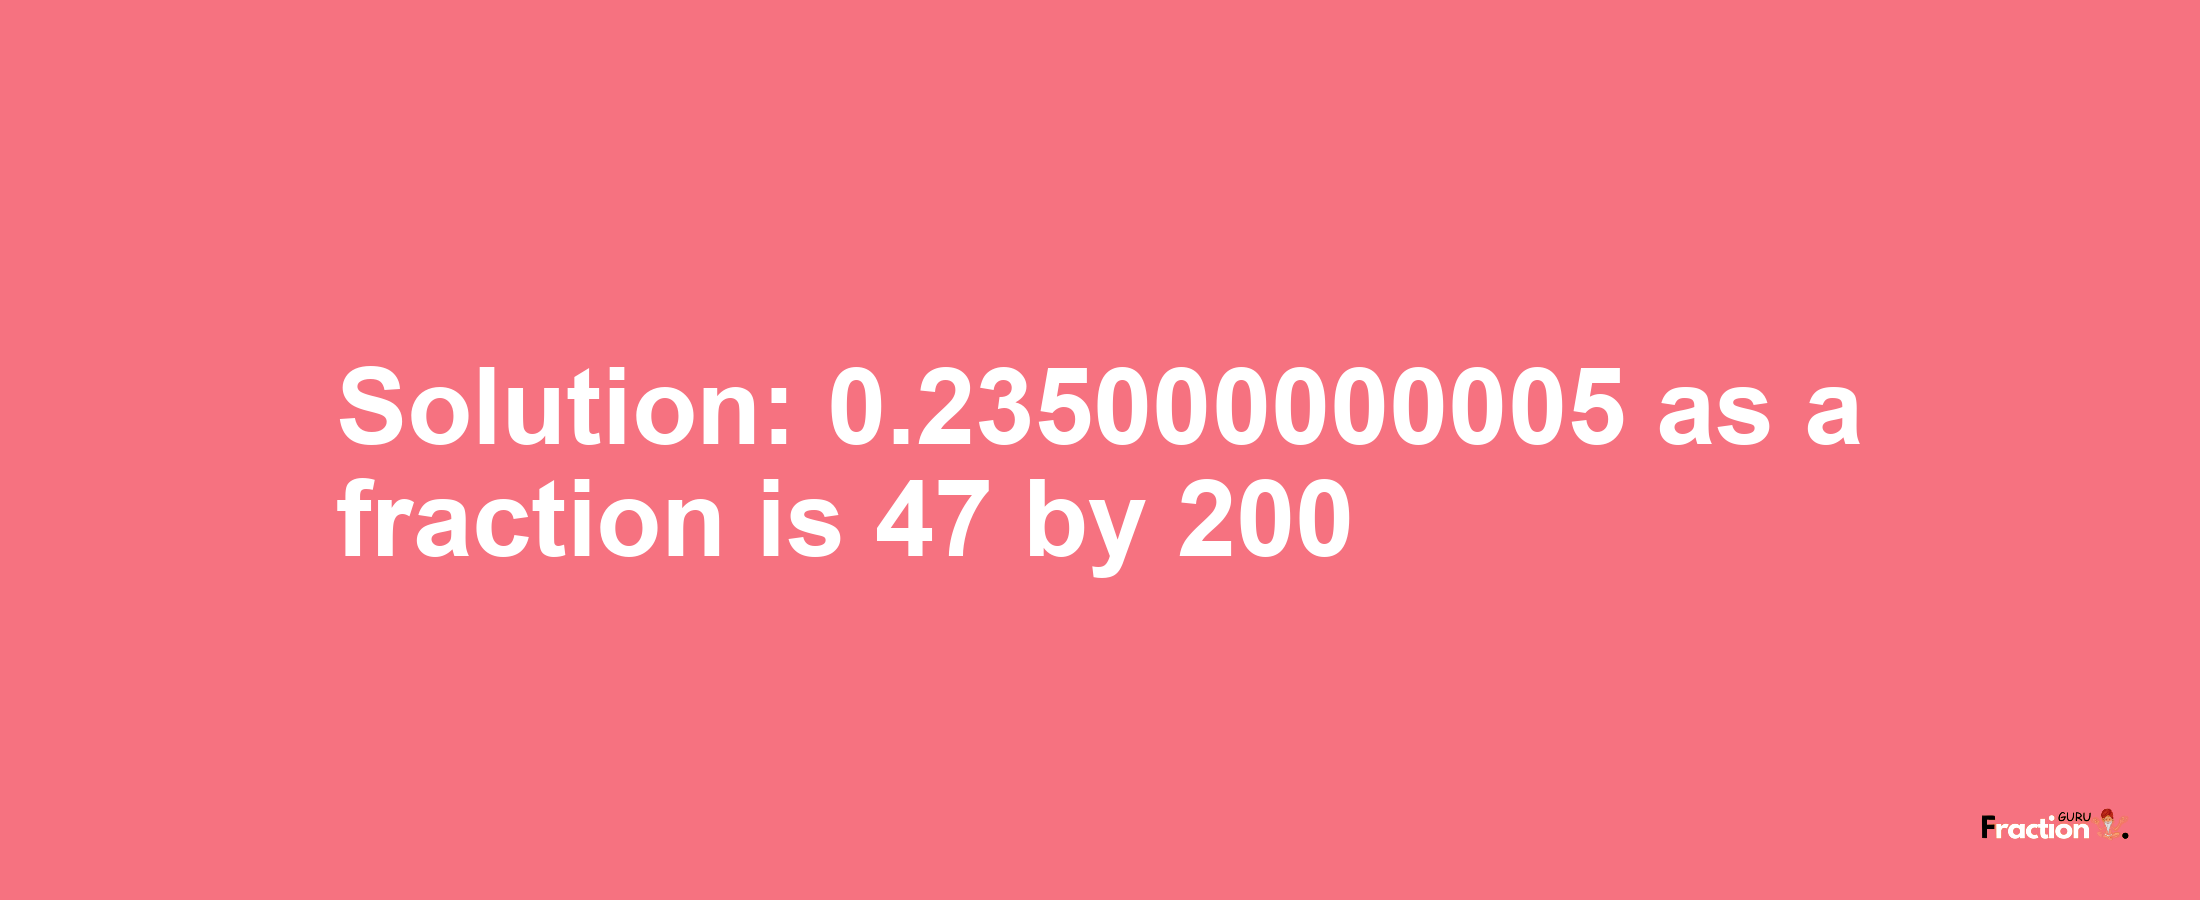 Solution:0.235000000005 as a fraction is 47/200